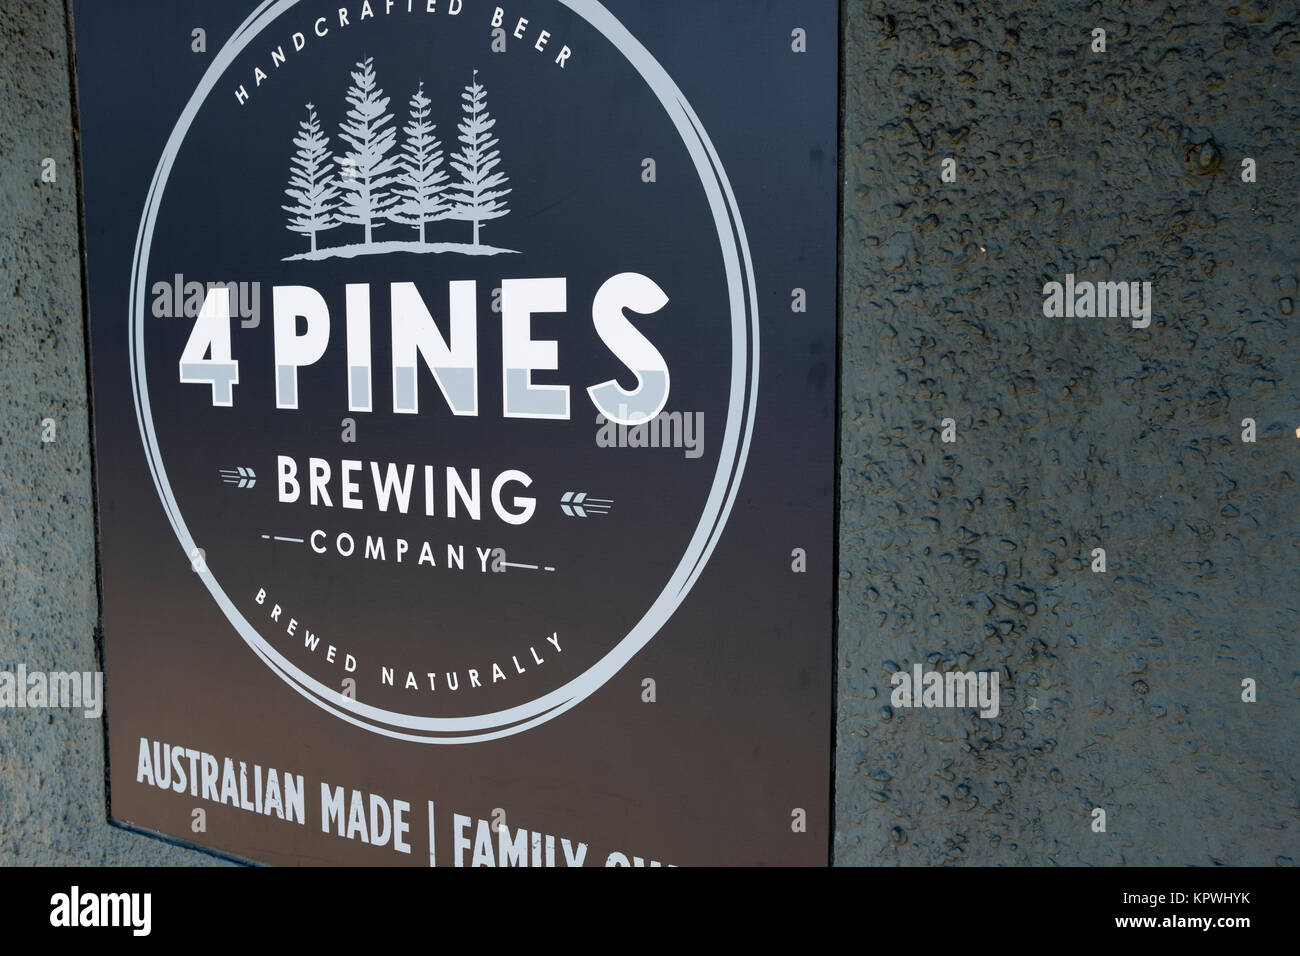 Australian 4 pines brewing company sign in Manly Sydney,NSW,Australia Stock Photo